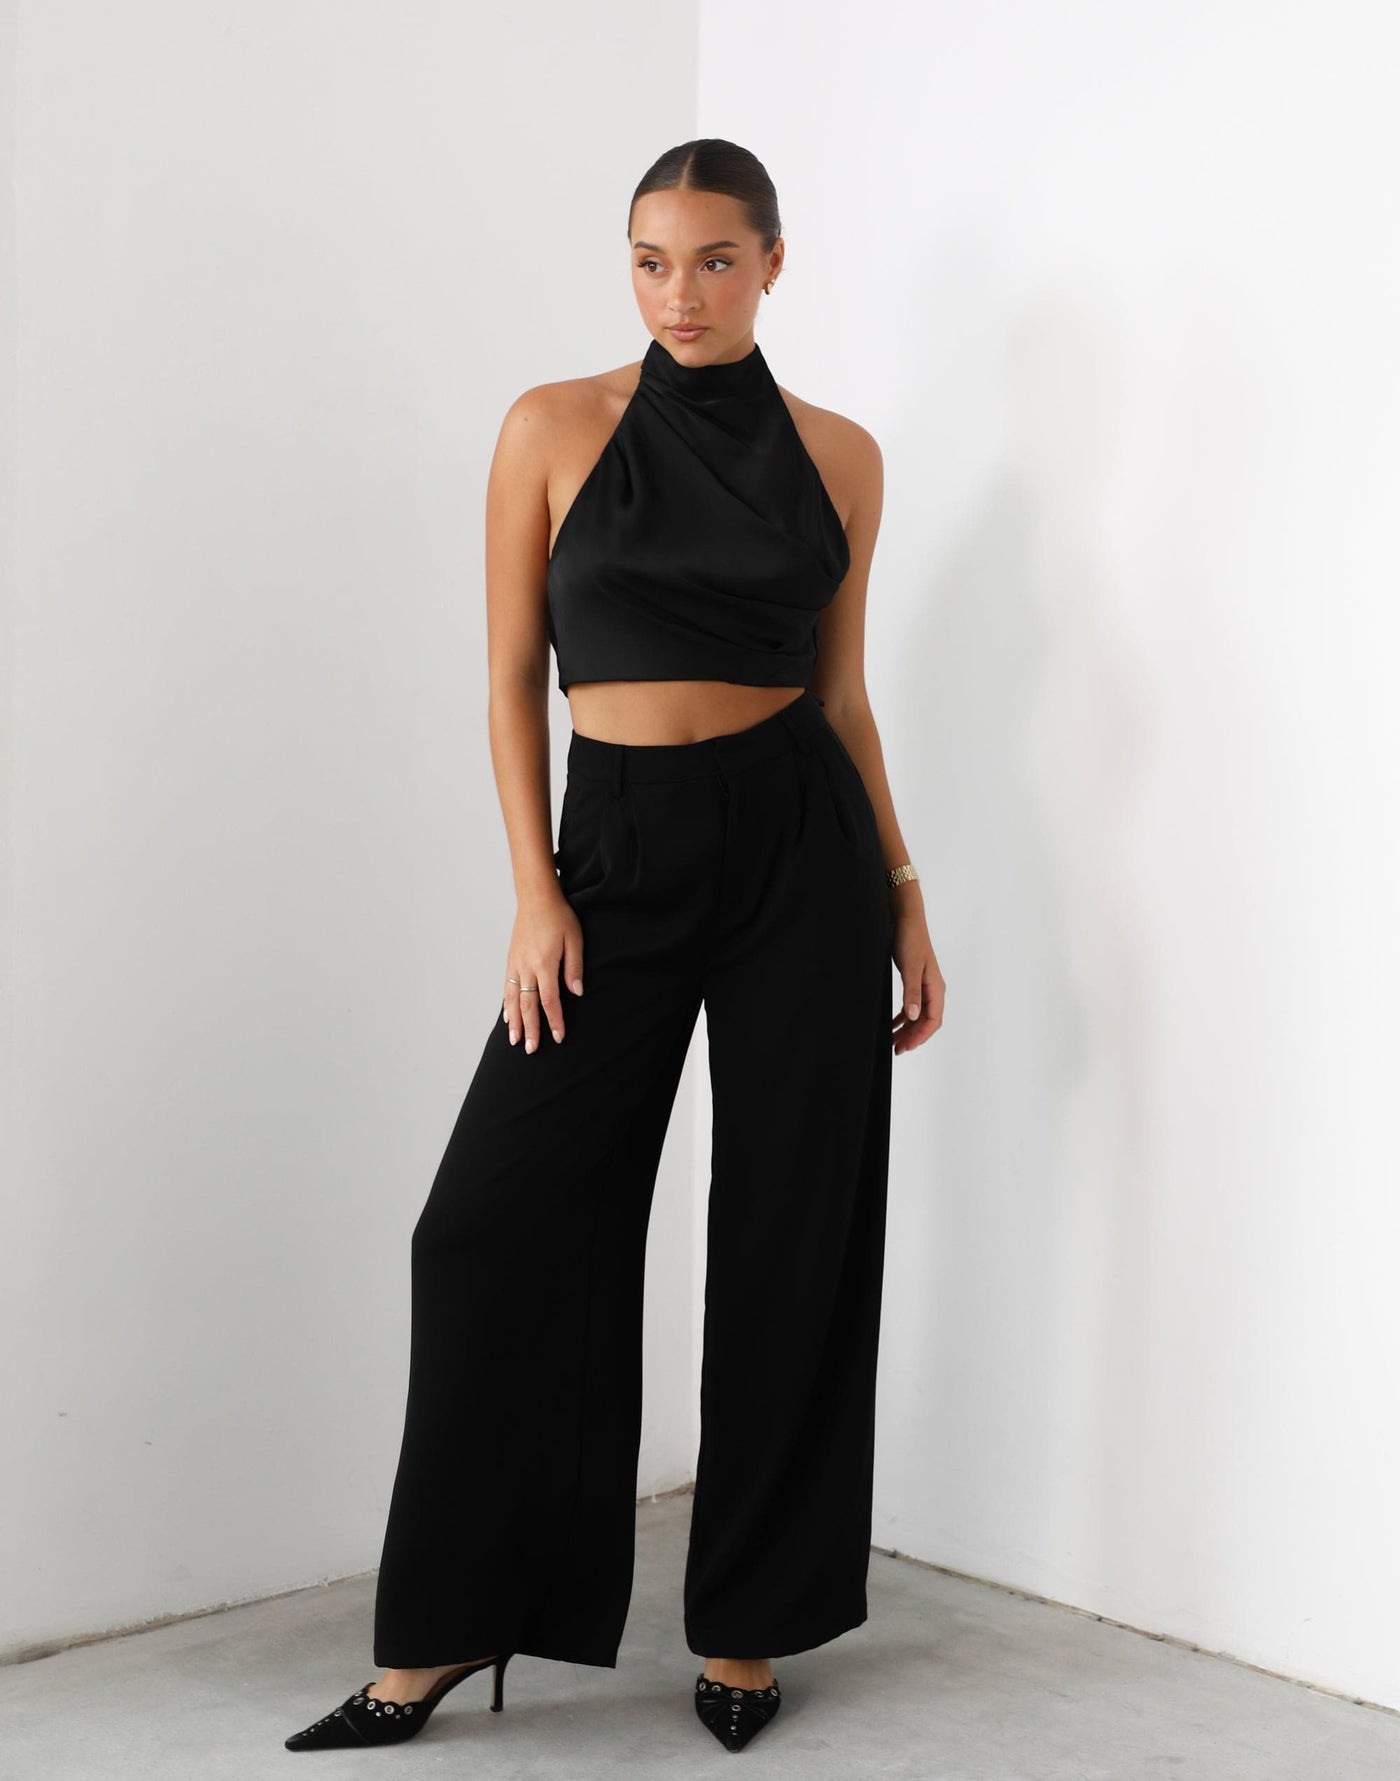 Chicago Pants (Black) - High Rise Tailored Wide Leg Pants - Women's Pants - Charcoal Clothing